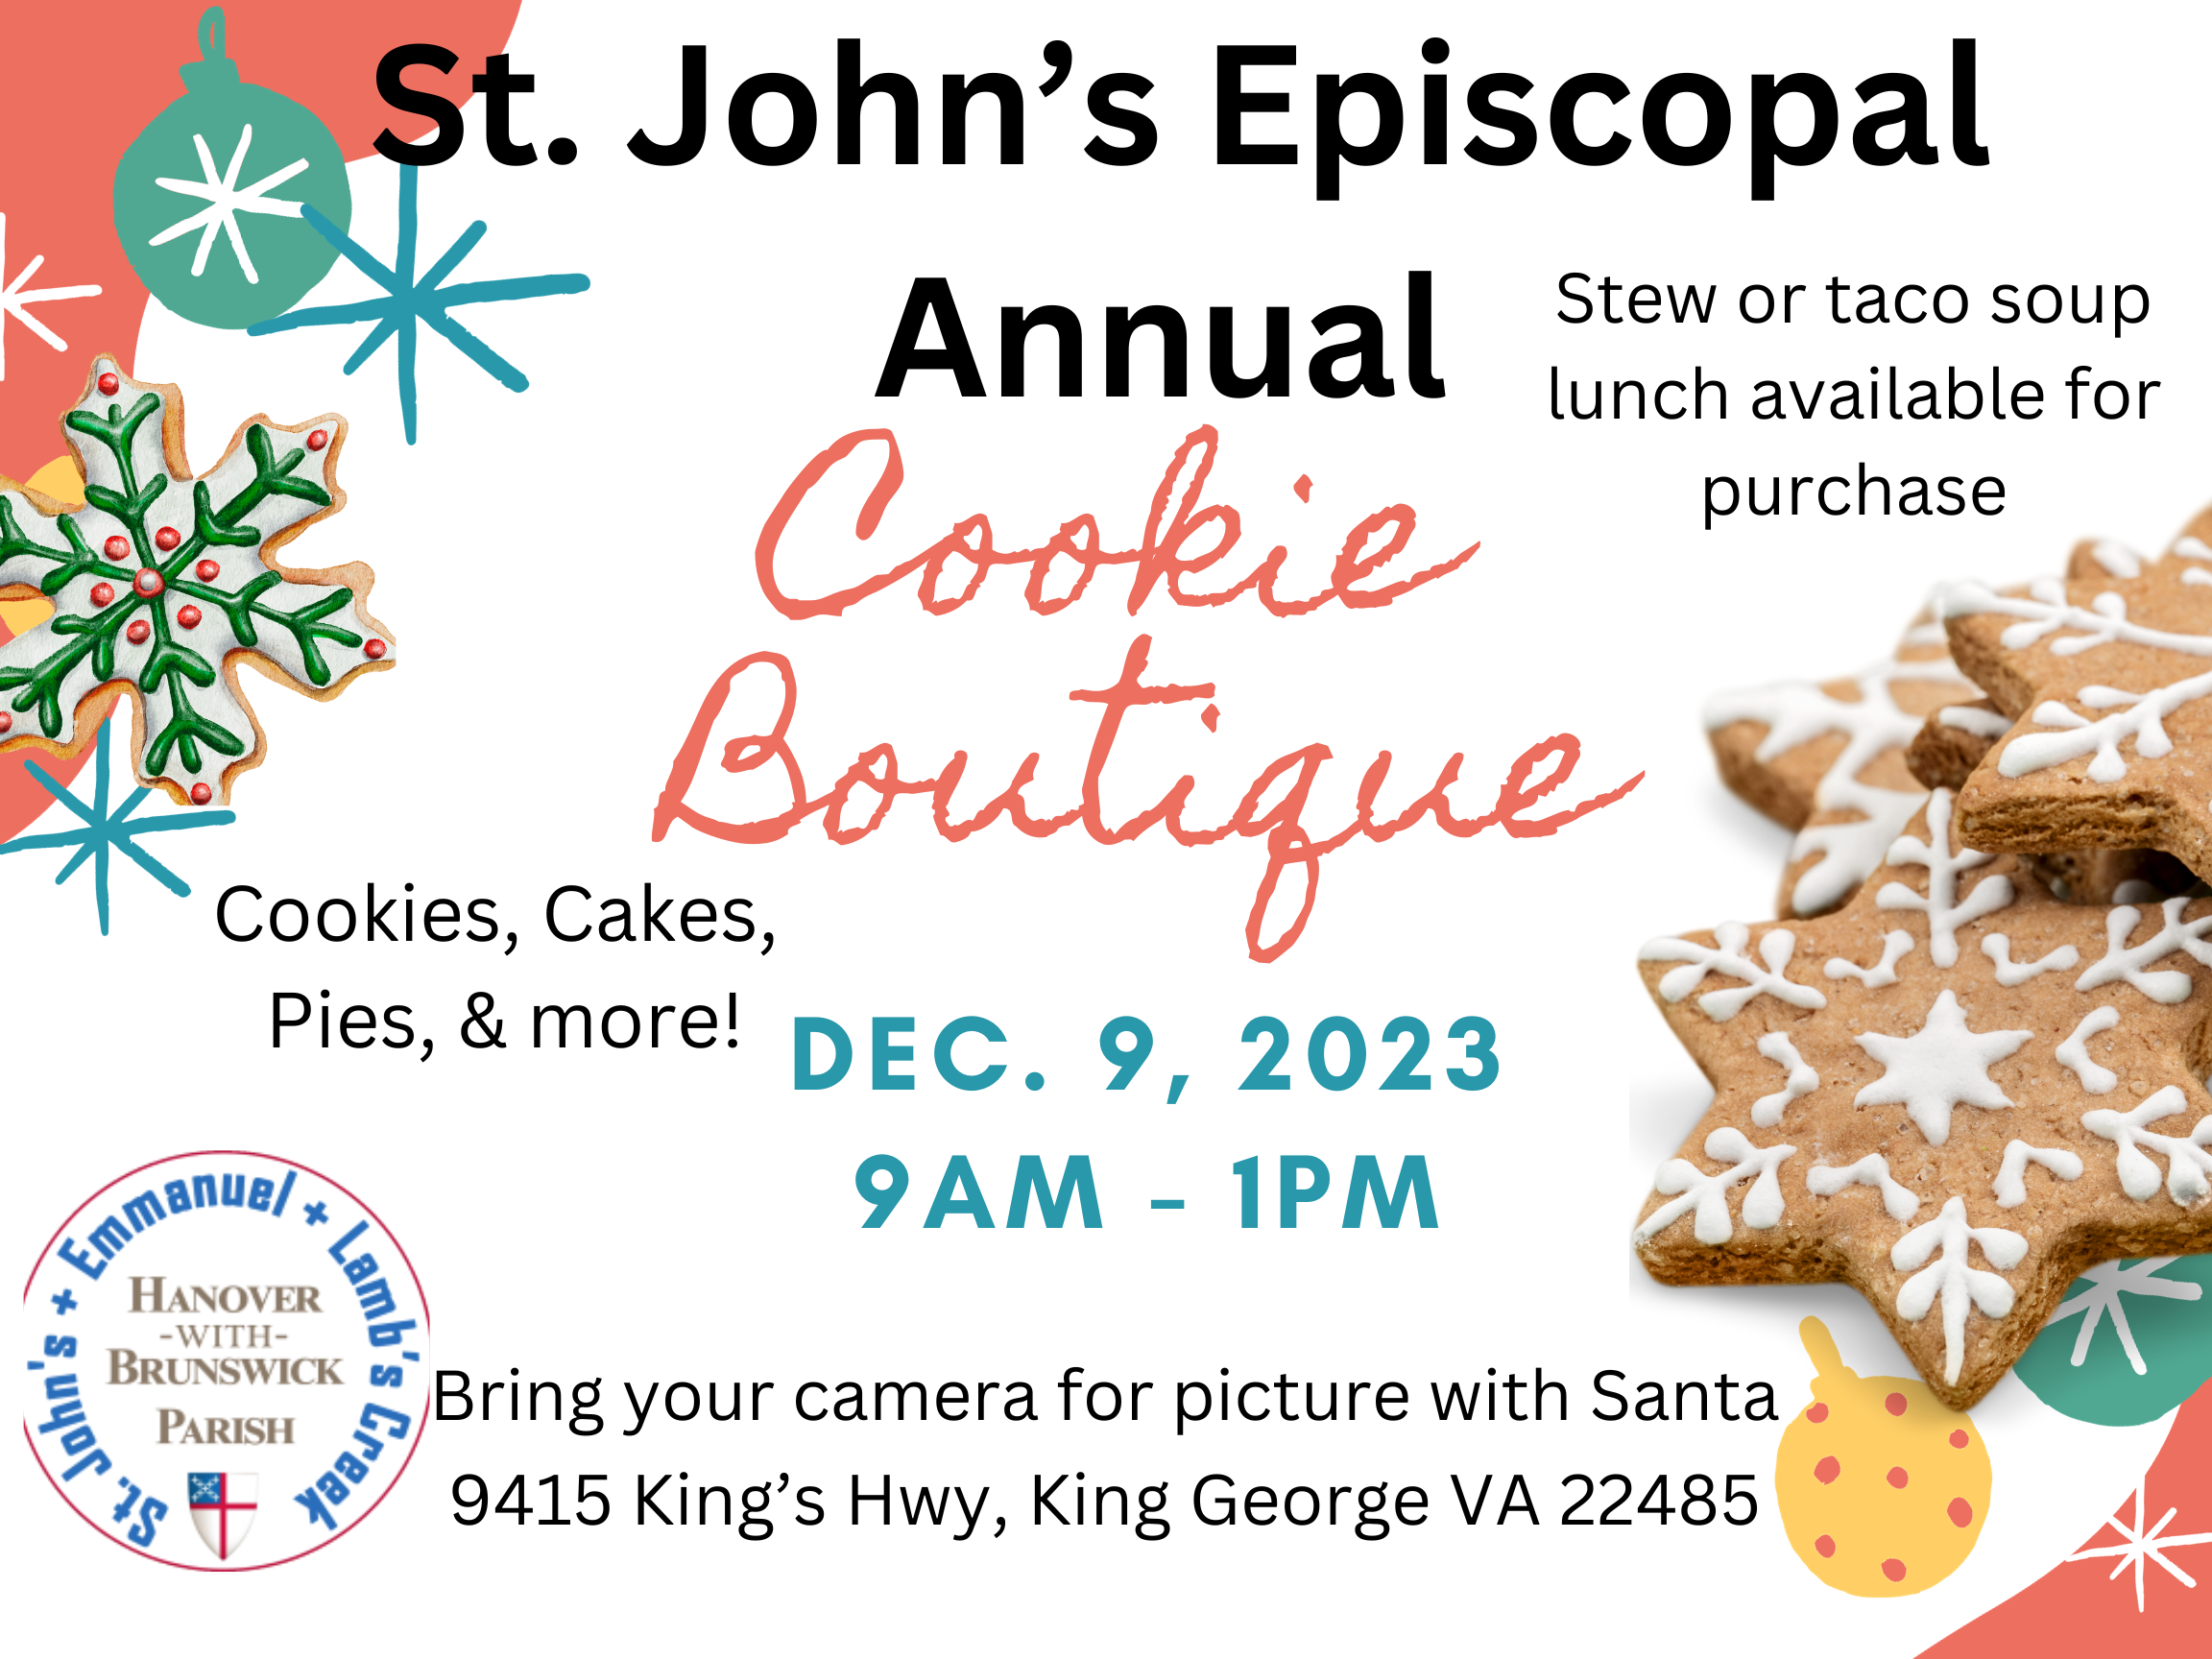 <h1 class="tribe-events-single-event-title">St. John’s Annual Cookie Boutique</h1>